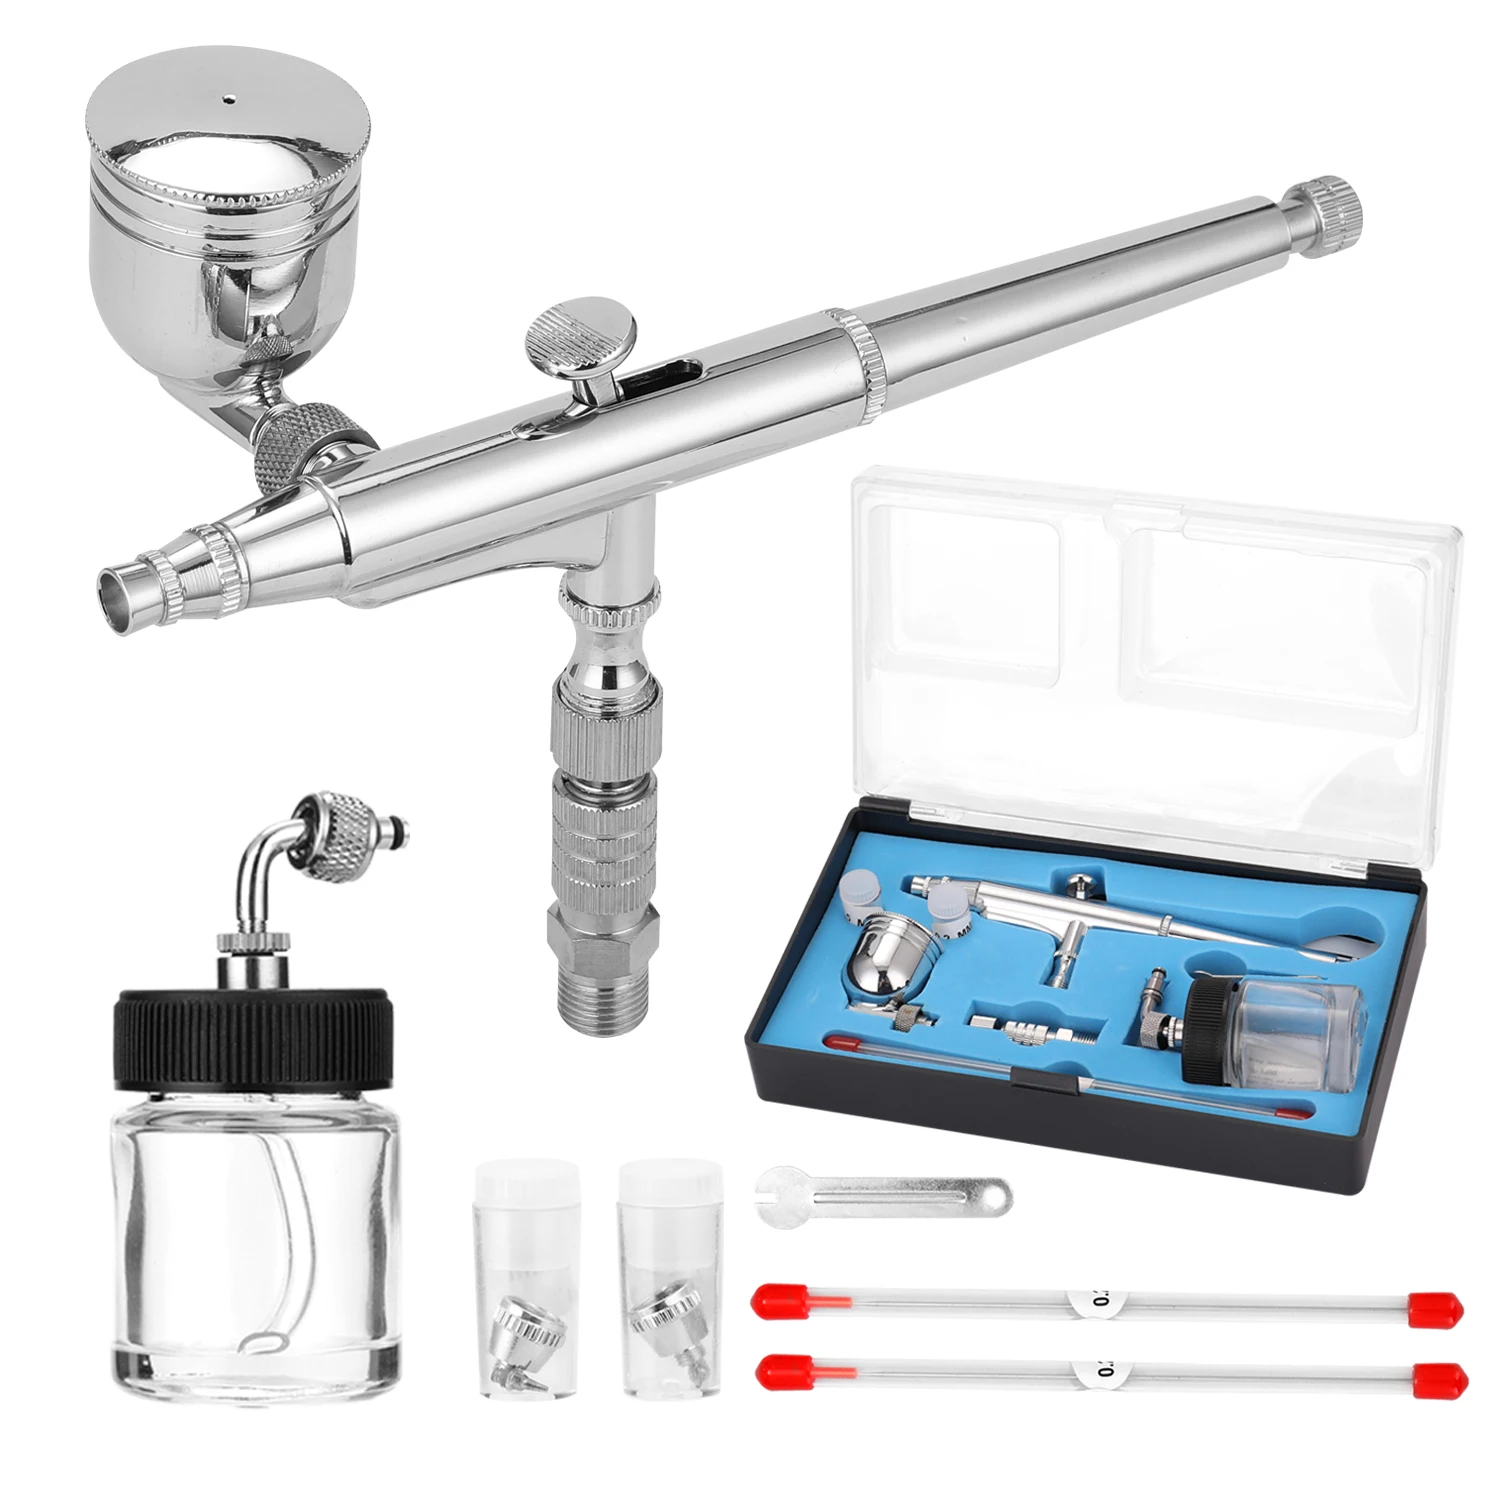 

Professional Airbrush Set for Model Making Art Painting with G1/8 Adapter Wrentch 2 Fluid Cups 2Needles 2 Nozzles Airbrush Kit